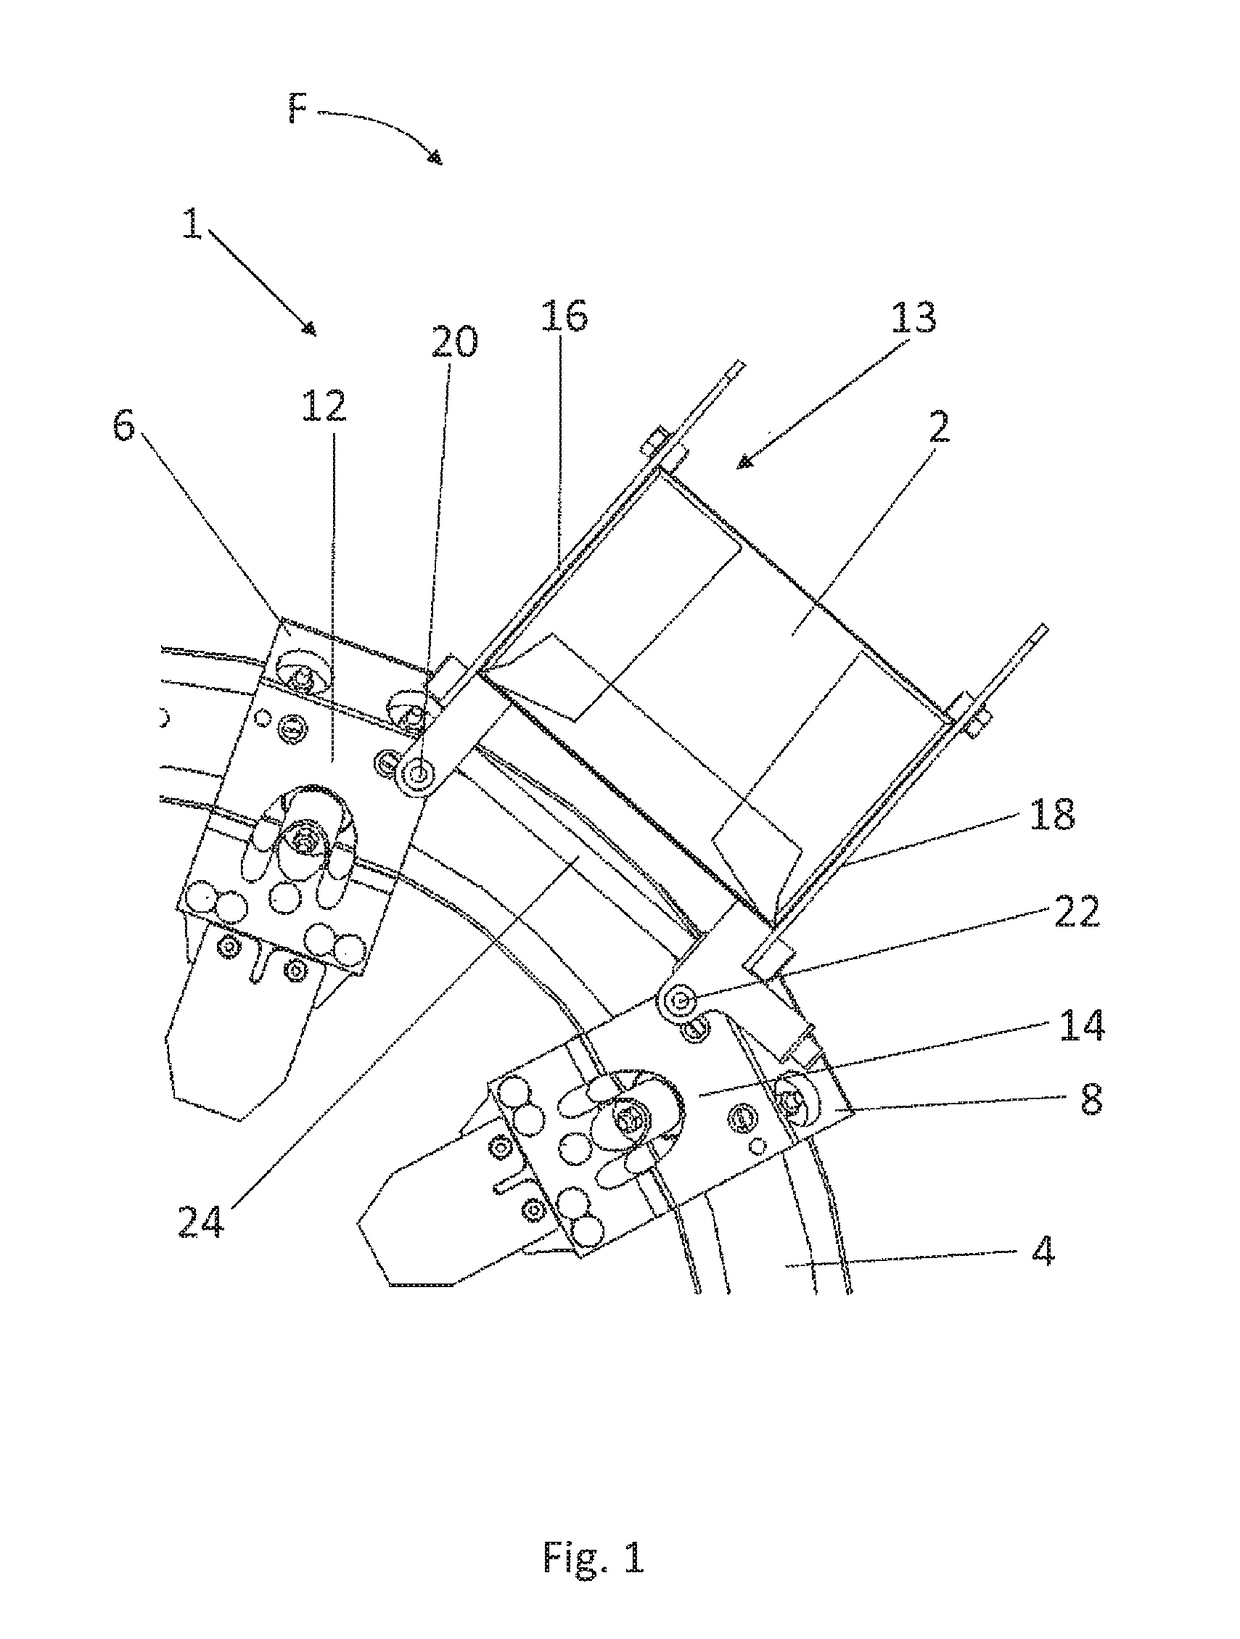 Transport device for conveying products